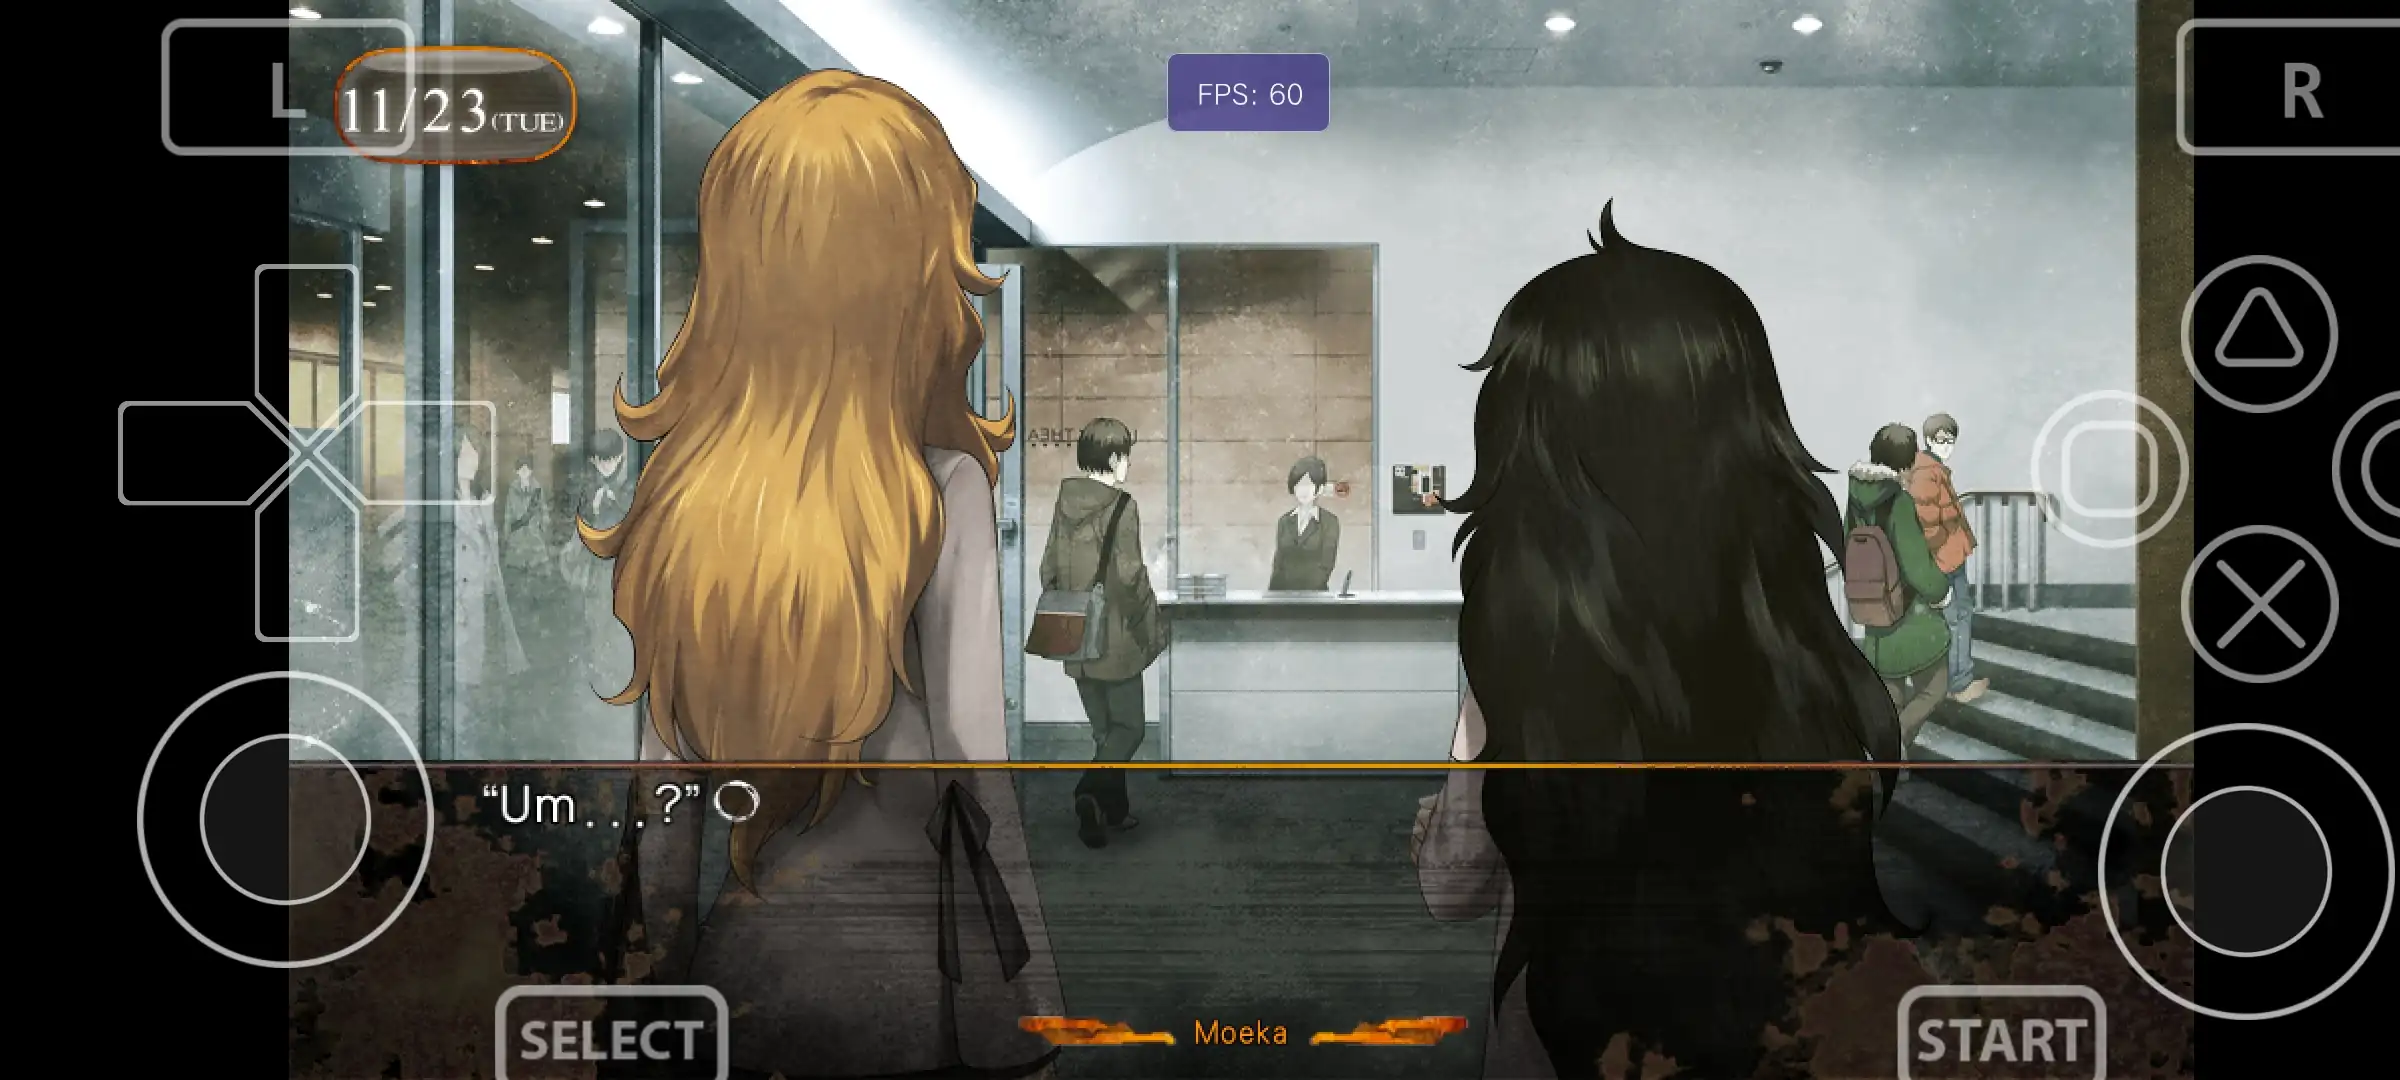 Steins Gate 0 Android APK + OBB - Vita3k Android - Ps Vita Emulator Android